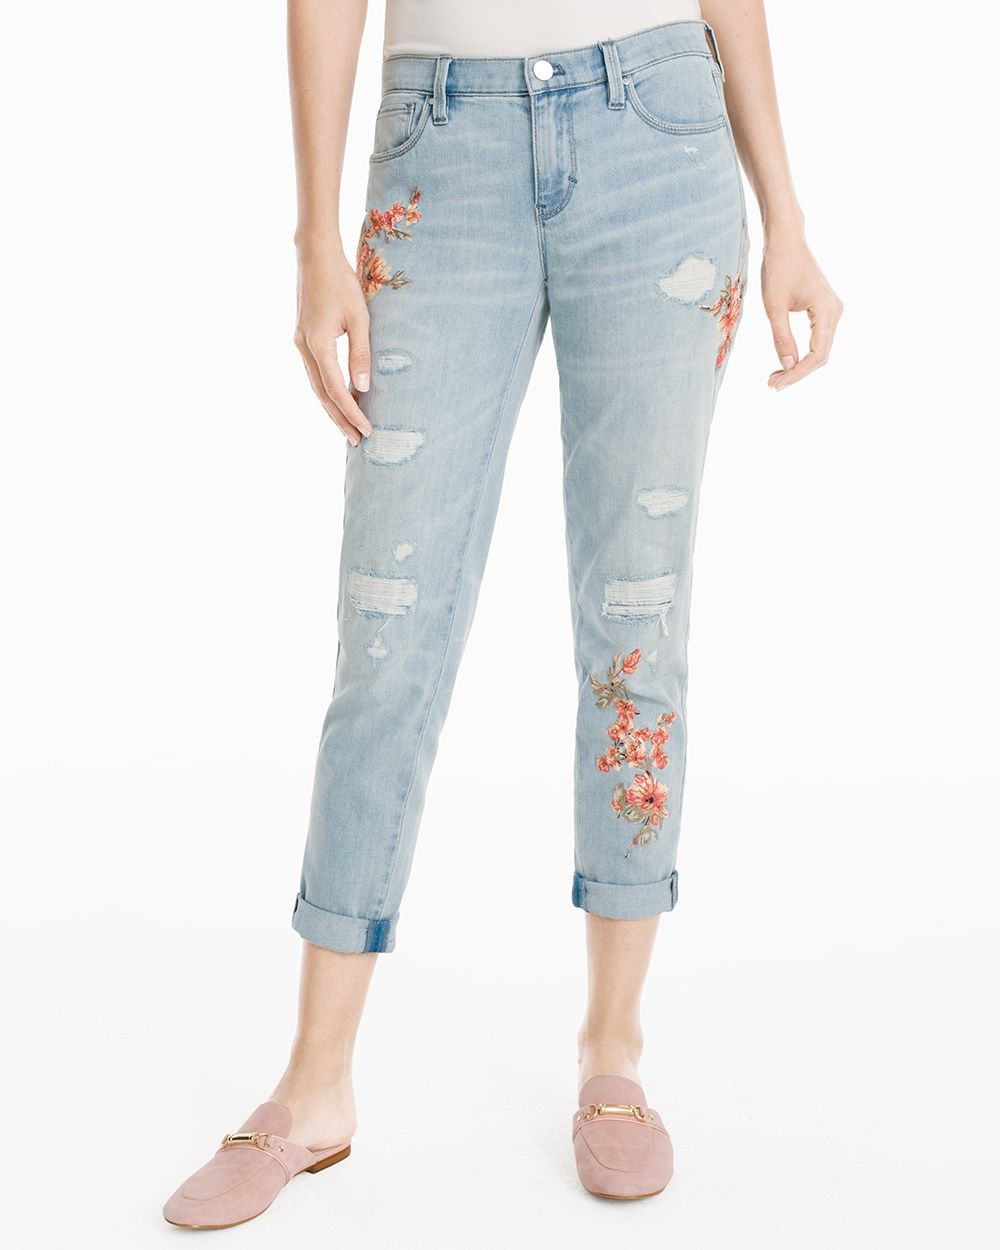 Women's Floral Embroidered Girlfriend Jeans by White House Black Market | White House Black Market